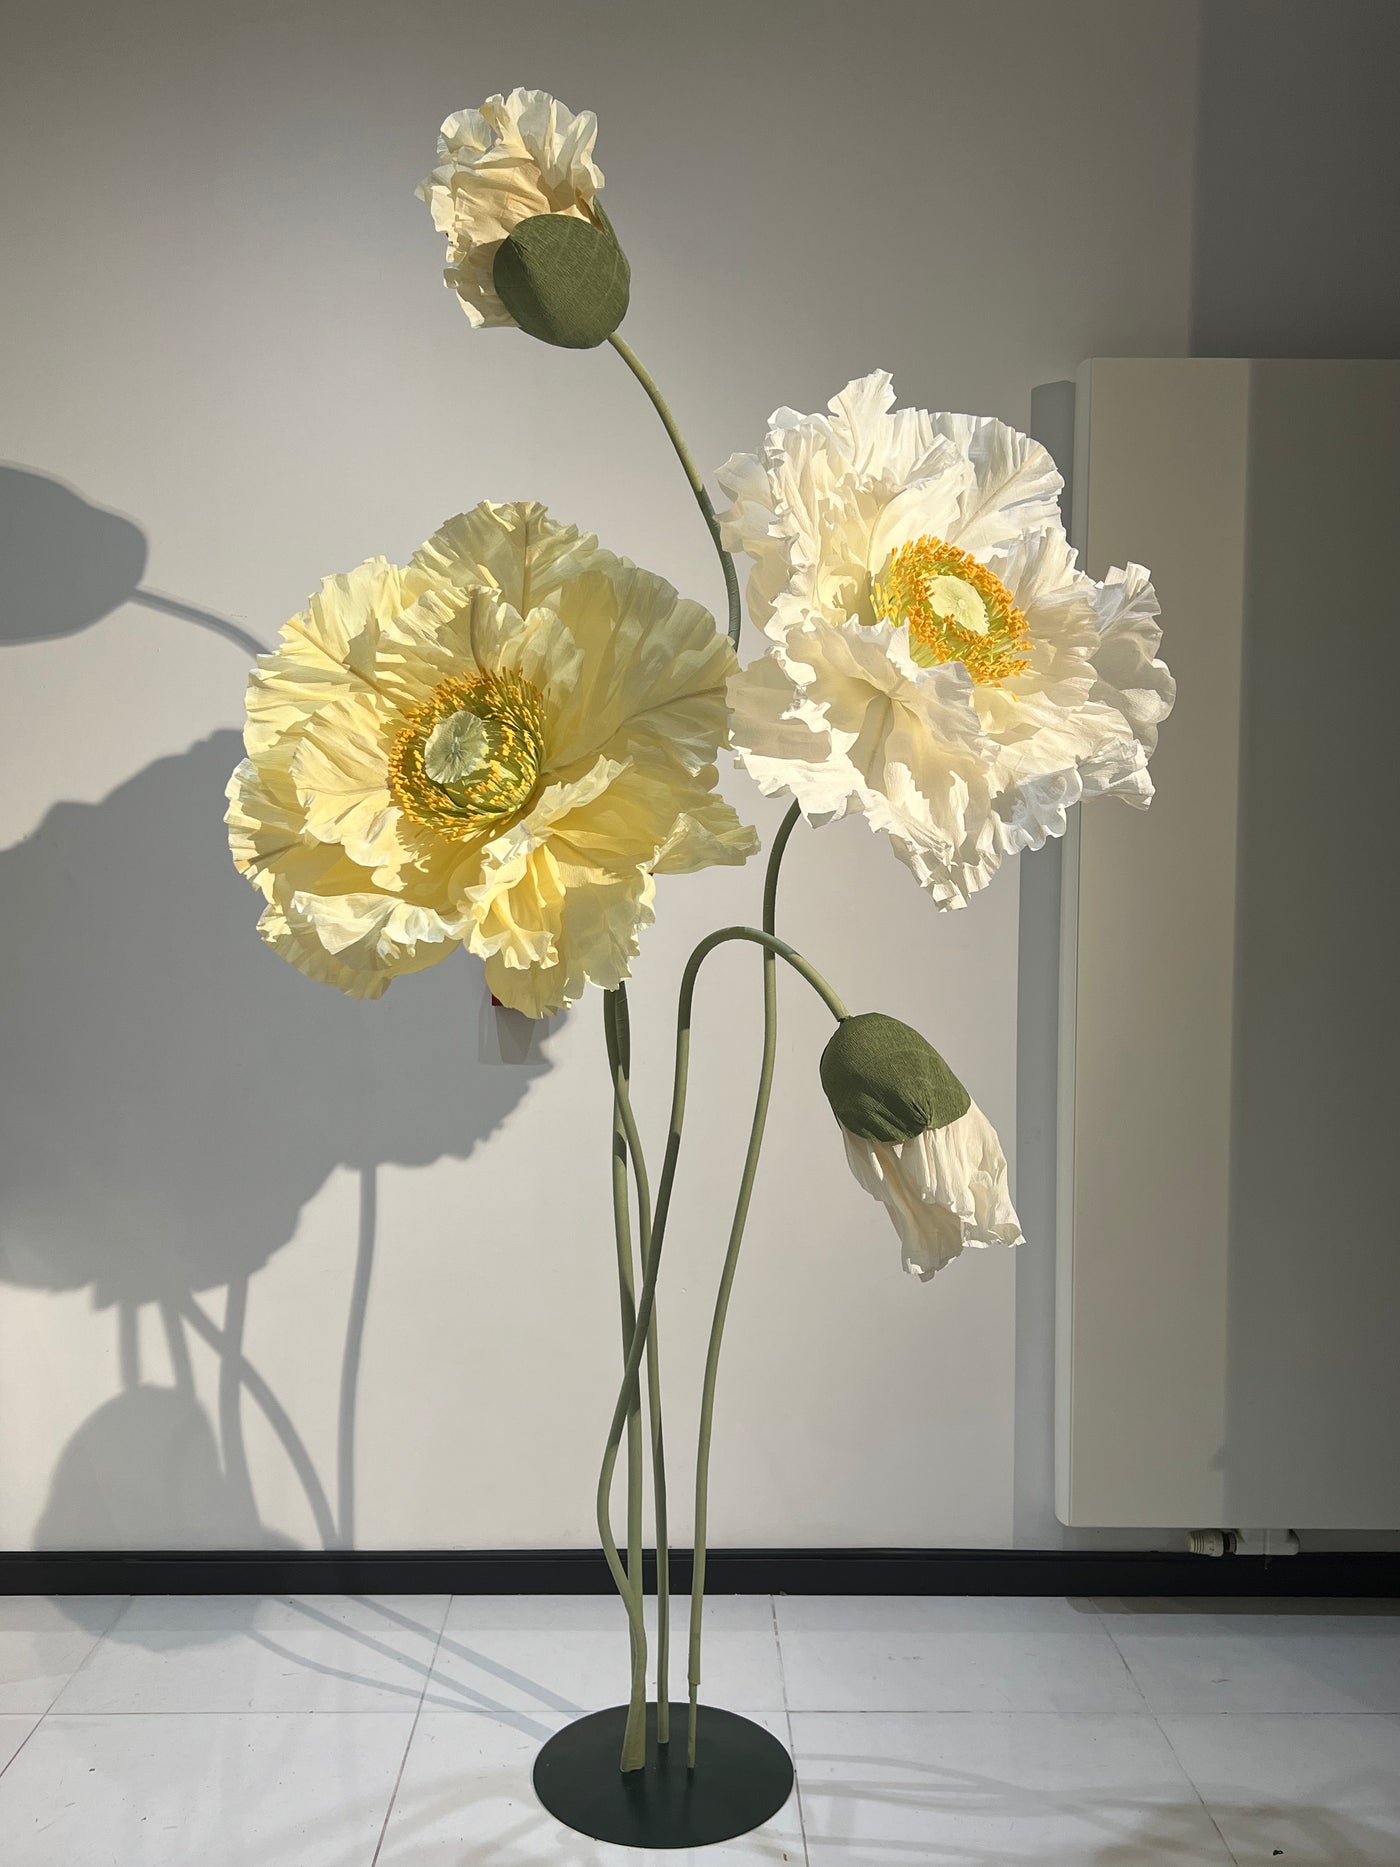 Event-ready oversized paper poppies - a stunning addition to any setting.